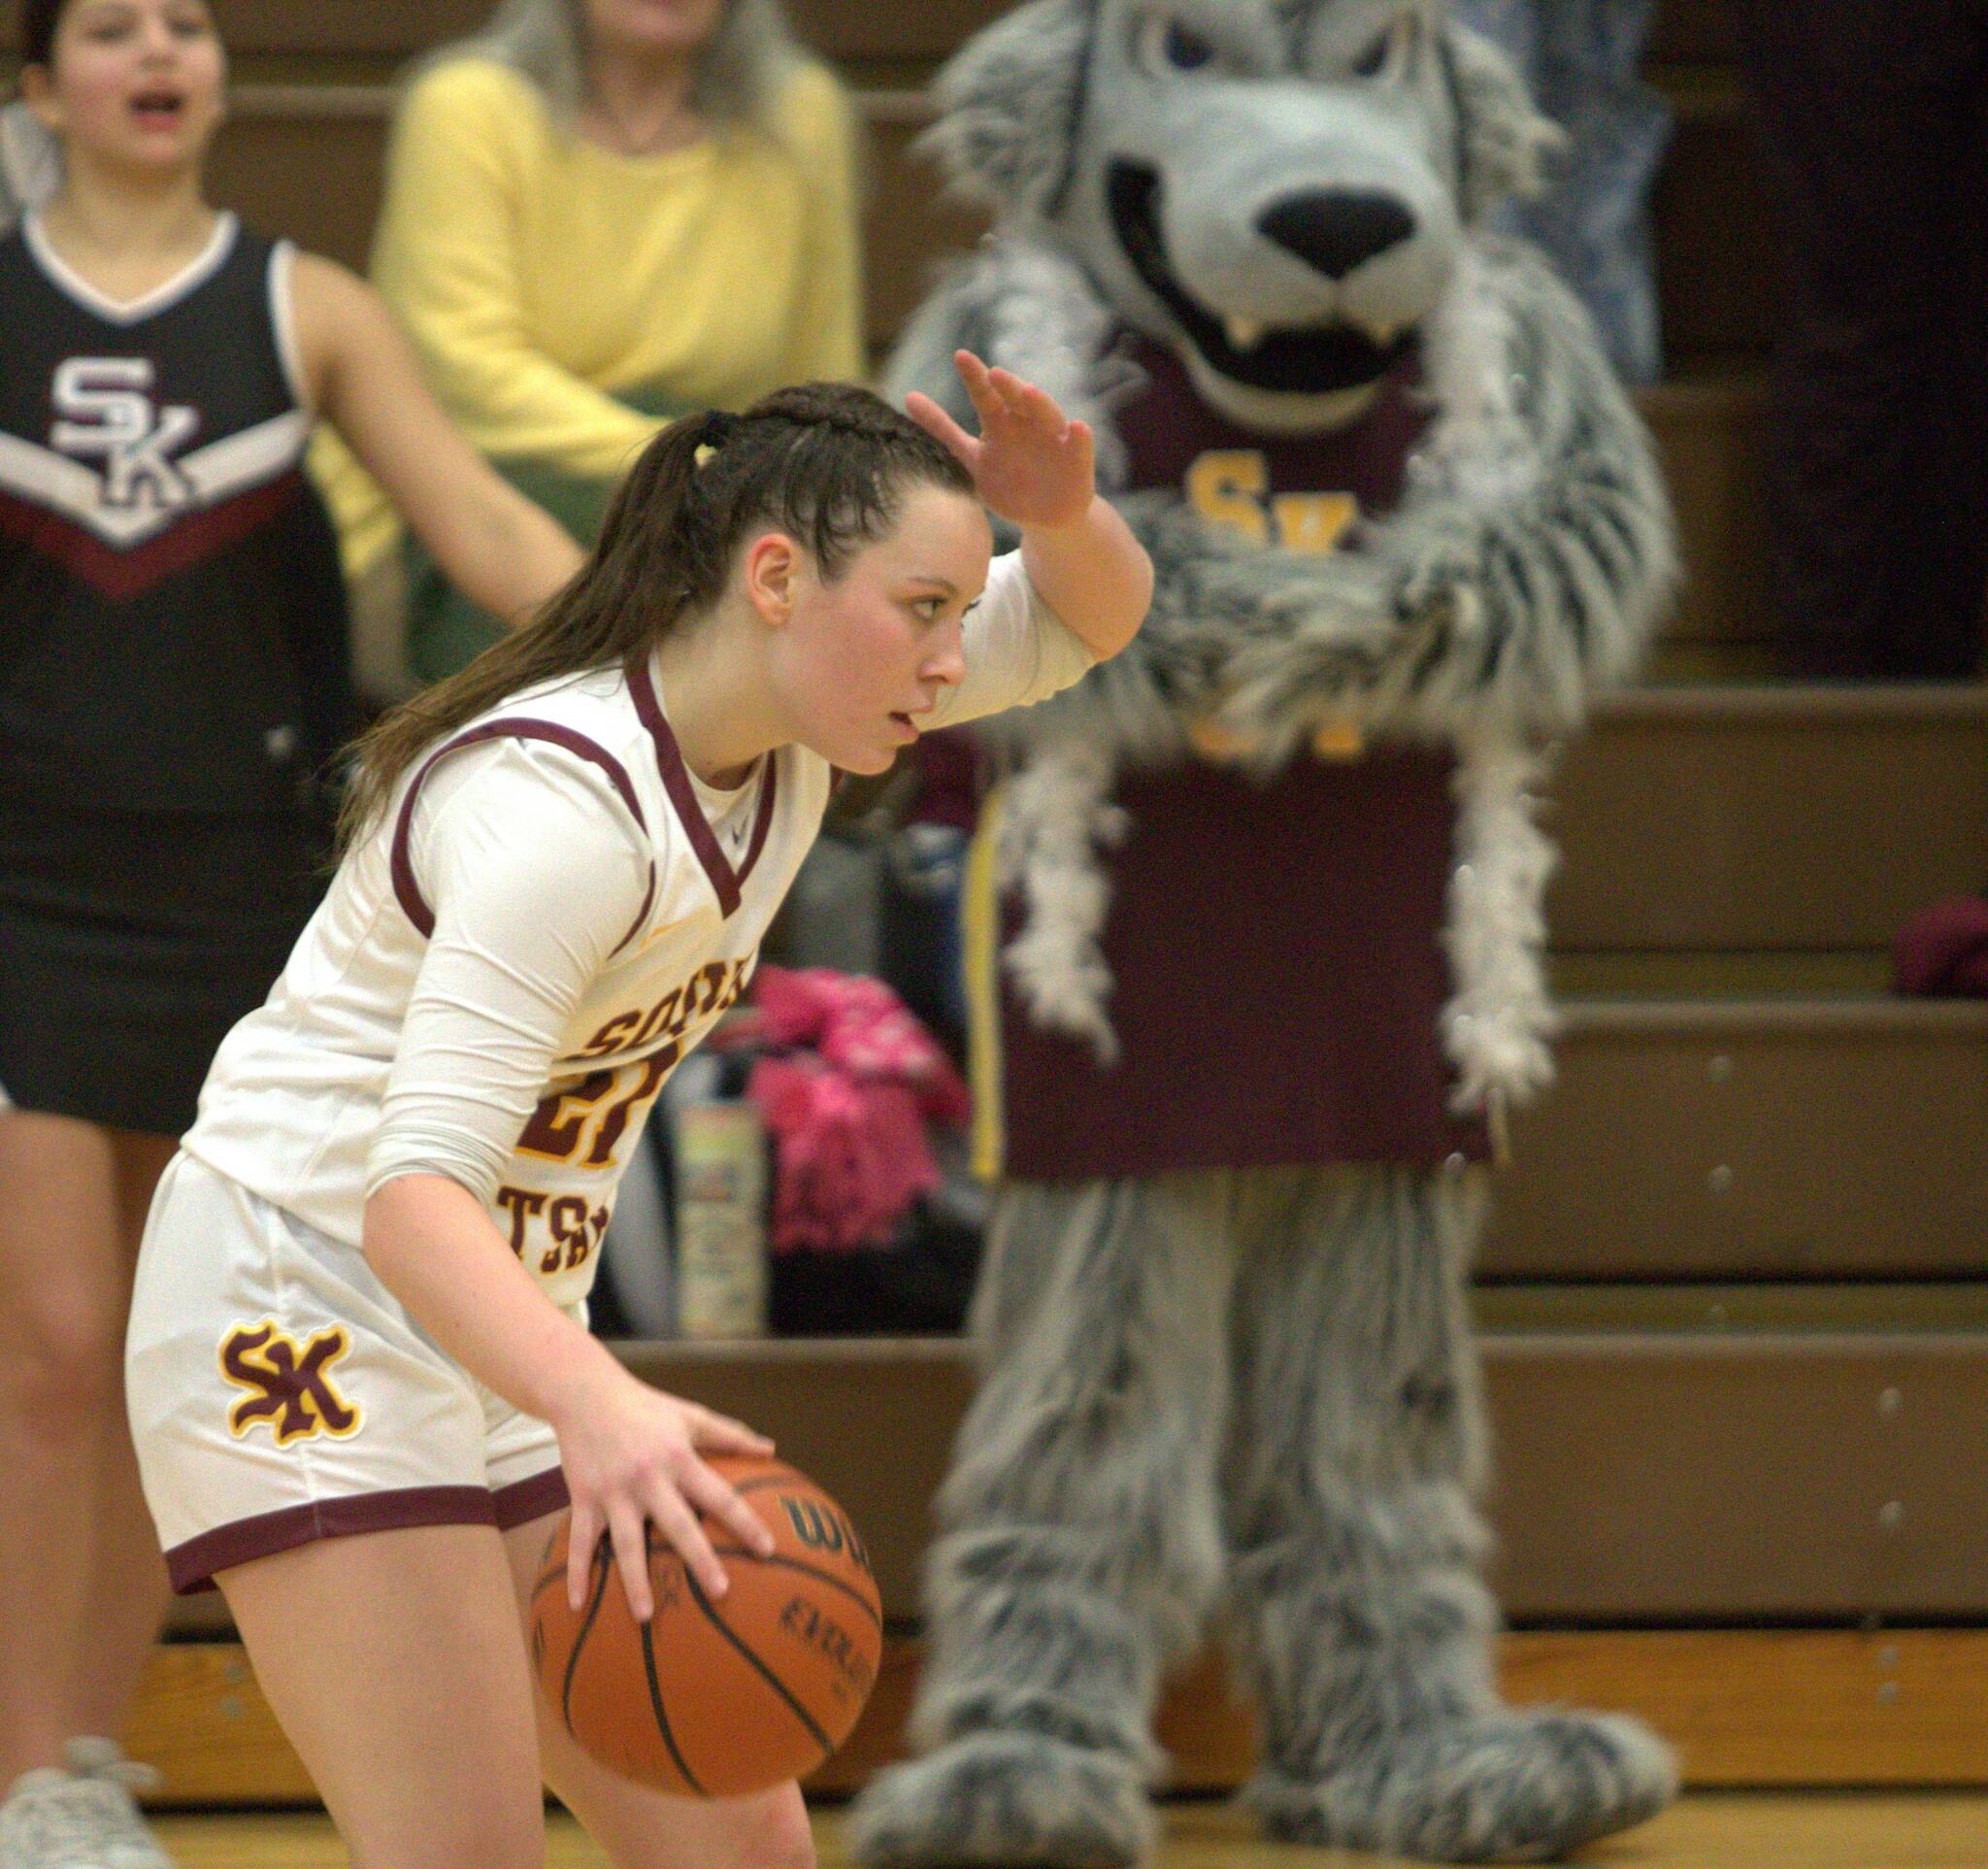 Senior Aly Loudermilk commands the offense during a first-half possession. Elisha Meyer/Kitsap News Group Photos